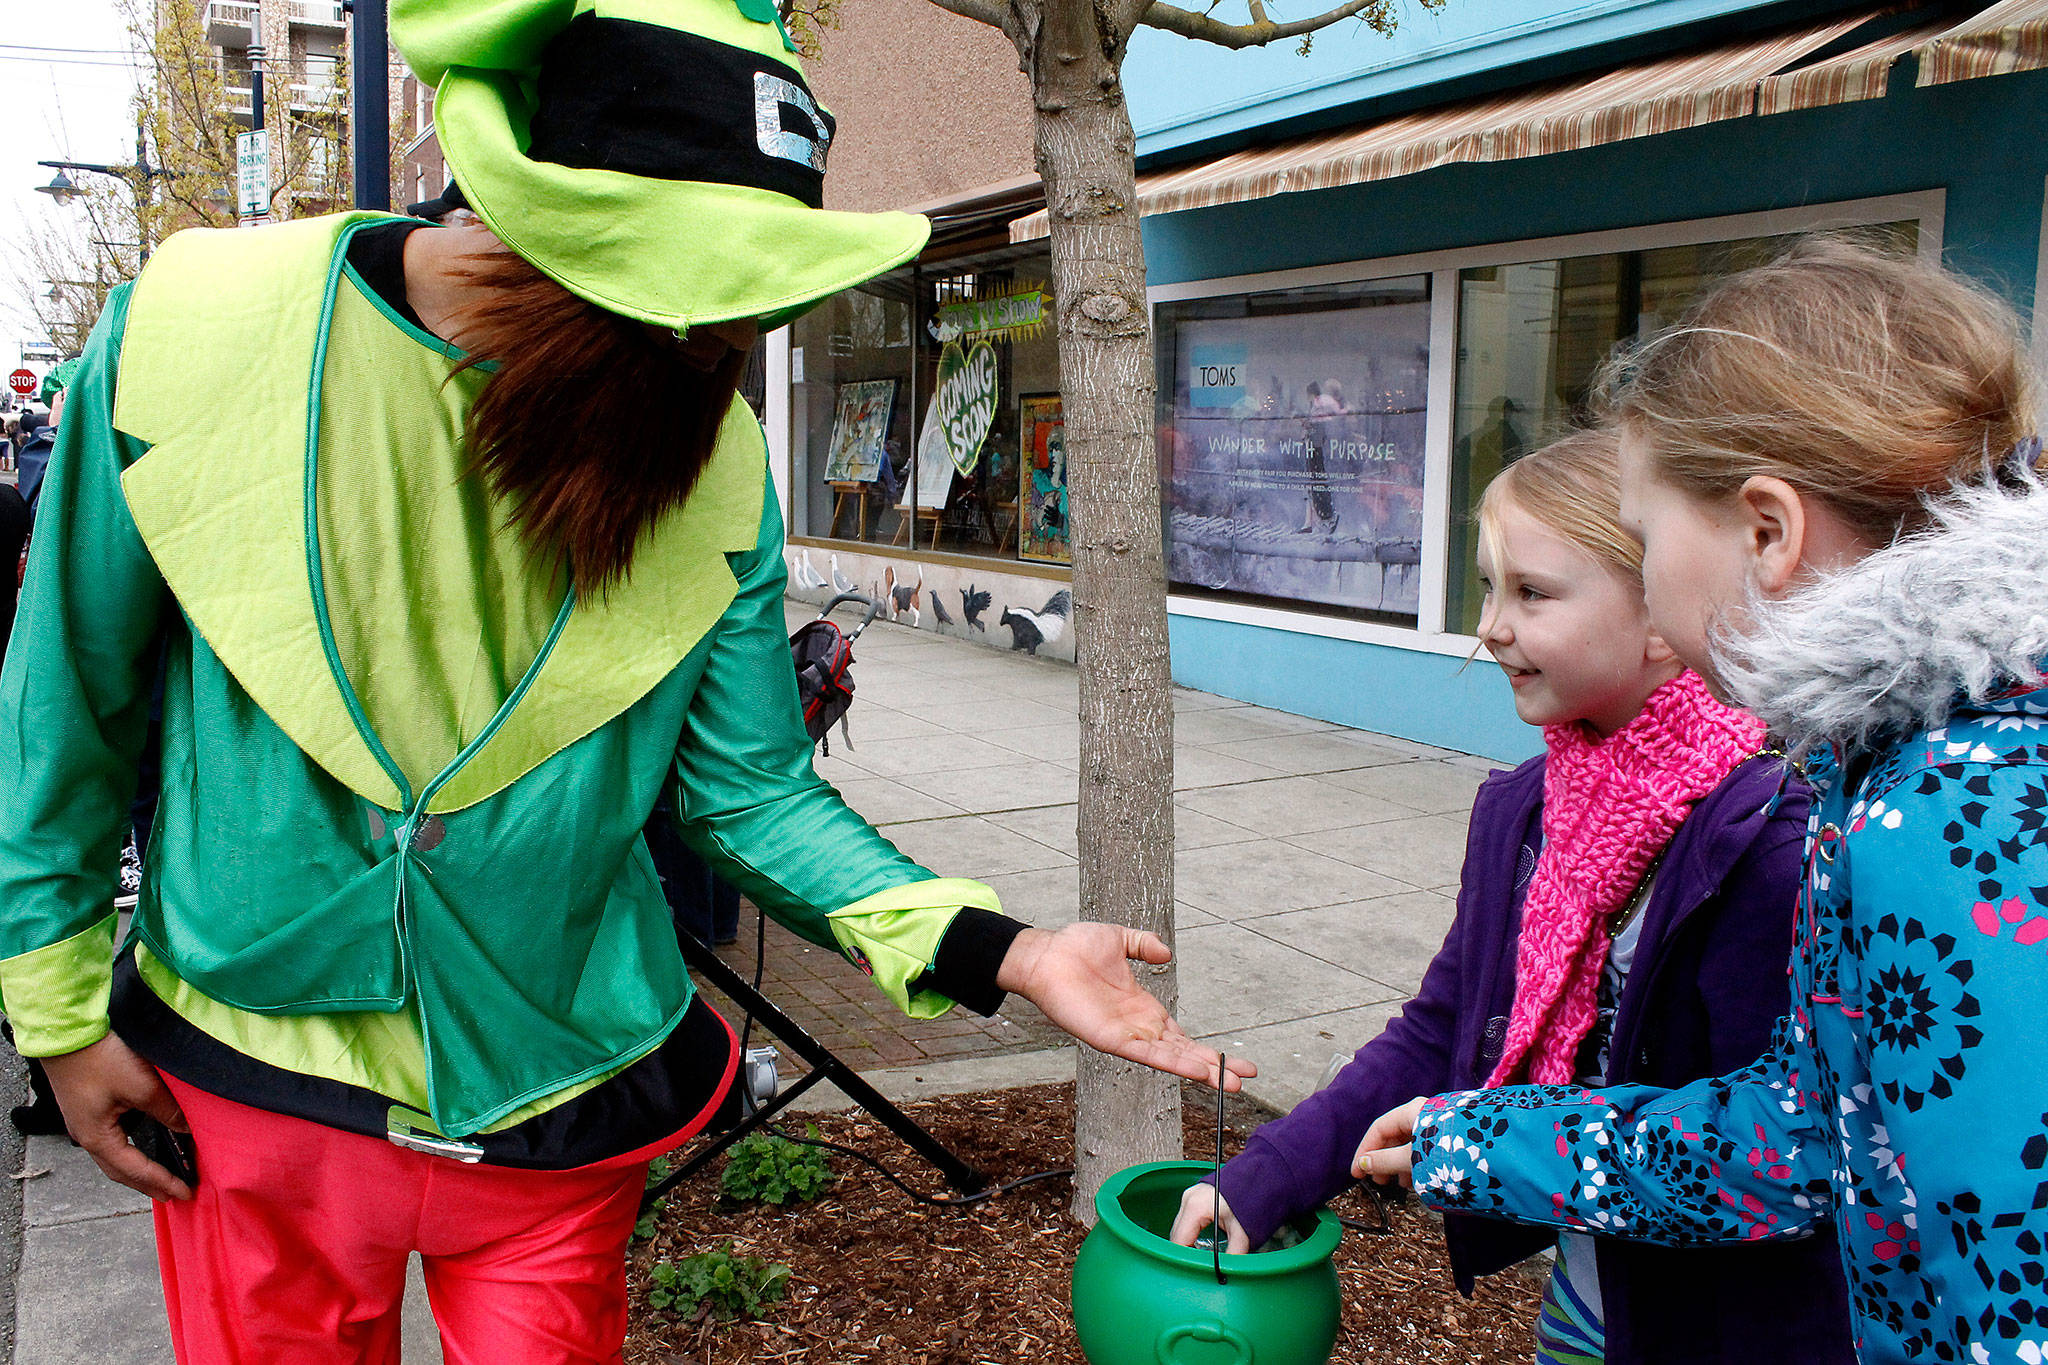 Girls spectating the 2016 Bremerton St. Patrick’s Day parade receive gold coins from a participant.                                Michelle Beahm / Kitsap News Group